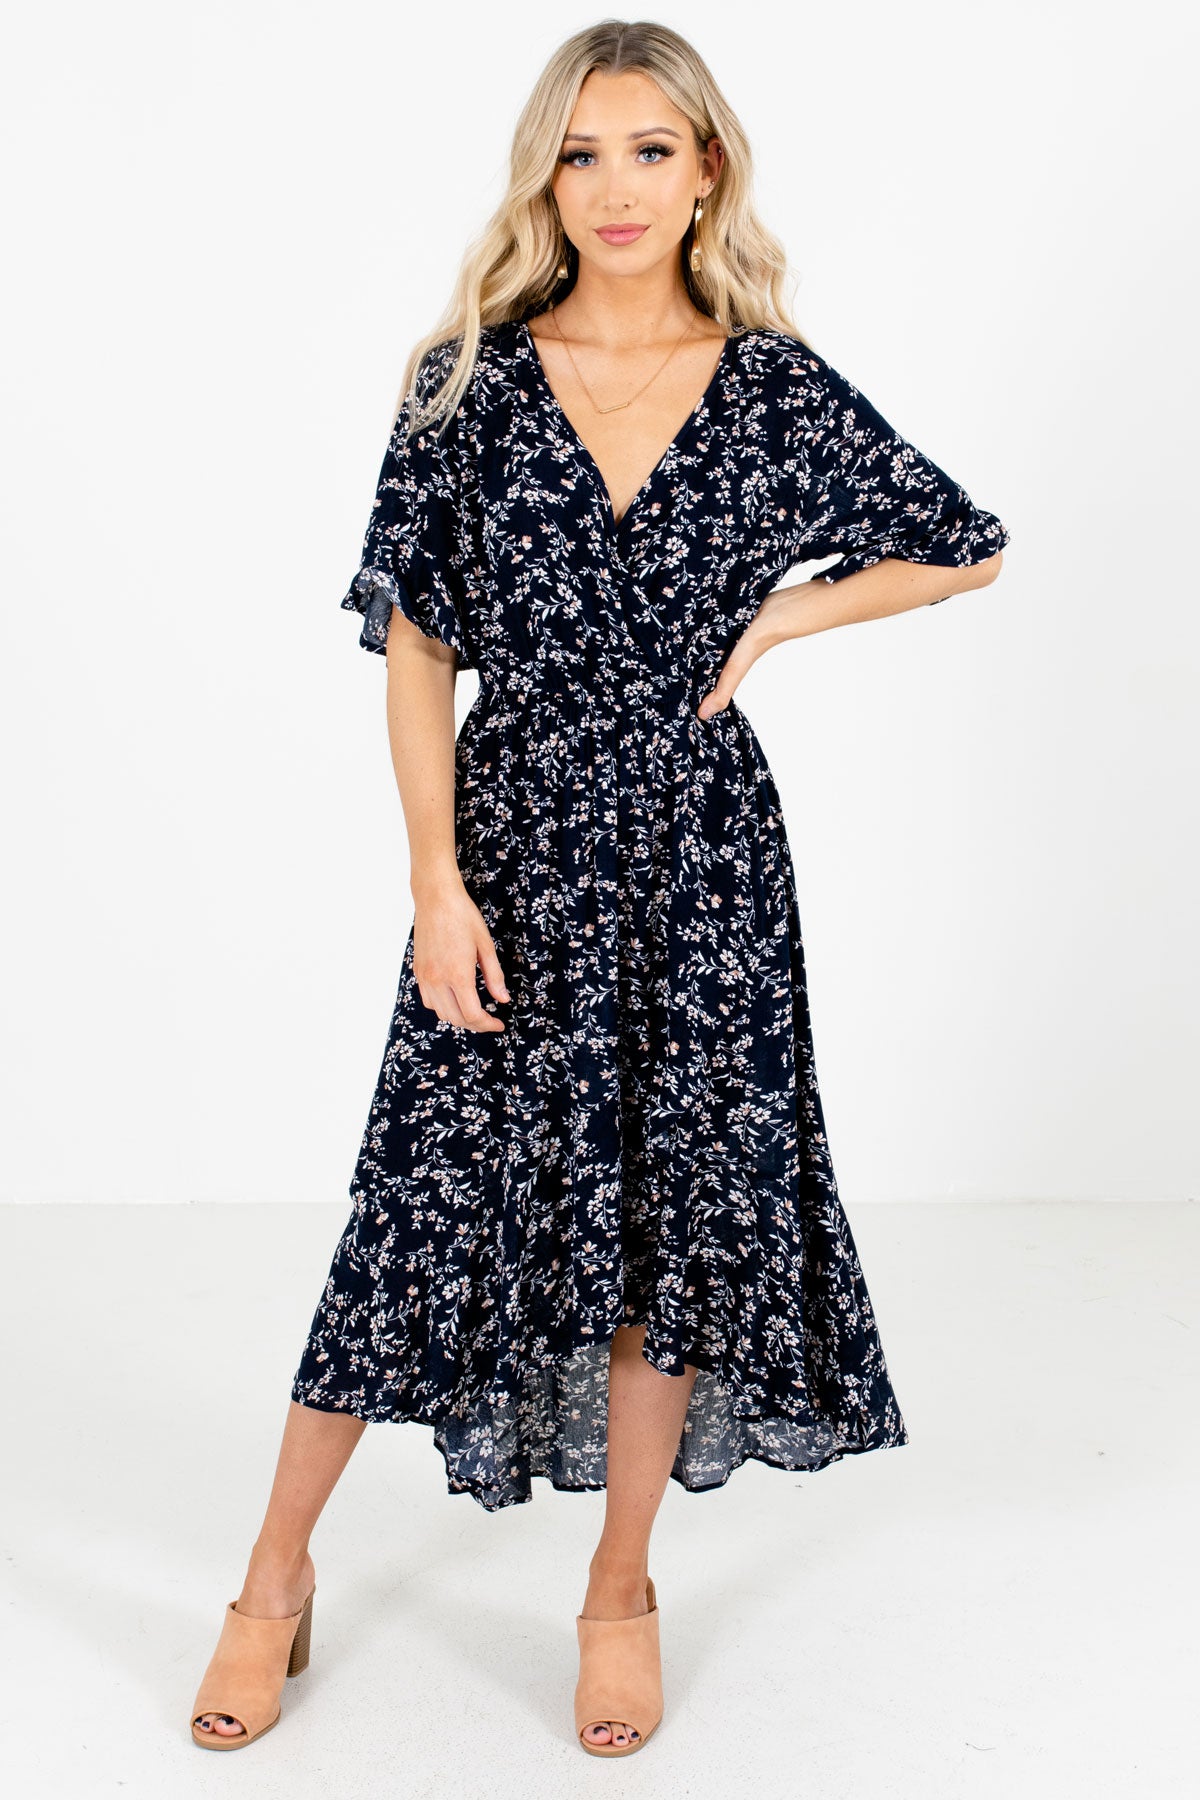 Navy Blue Multicolored Floral Pattern Boutique Midi Dresses for Women